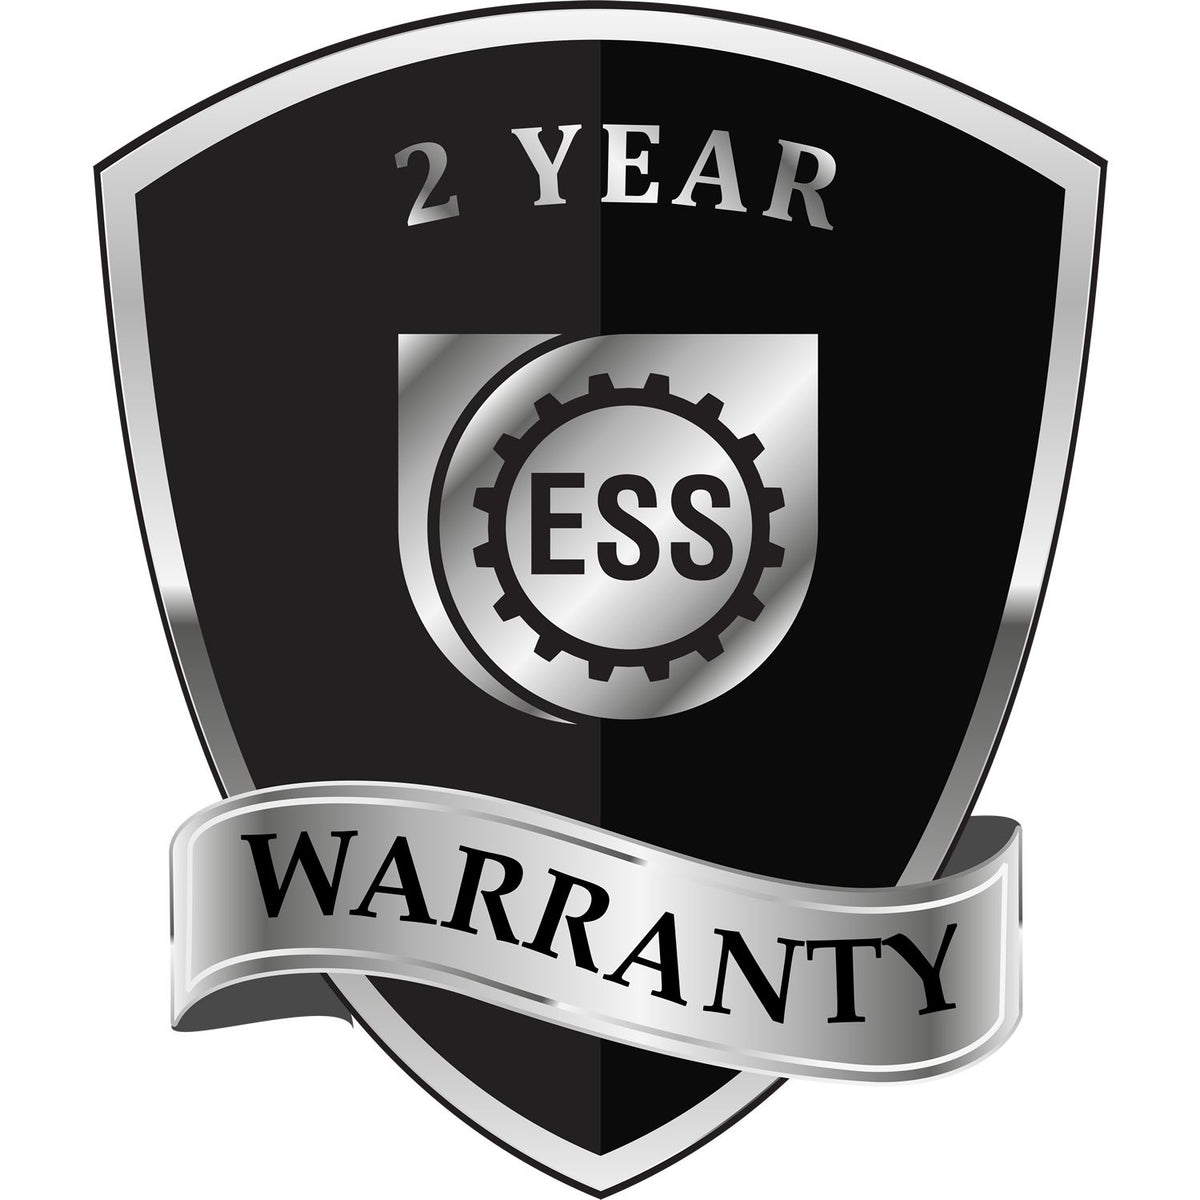 A black and silver badge or emblem showing warranty information for the Gift District of Columbia Engineer Seal